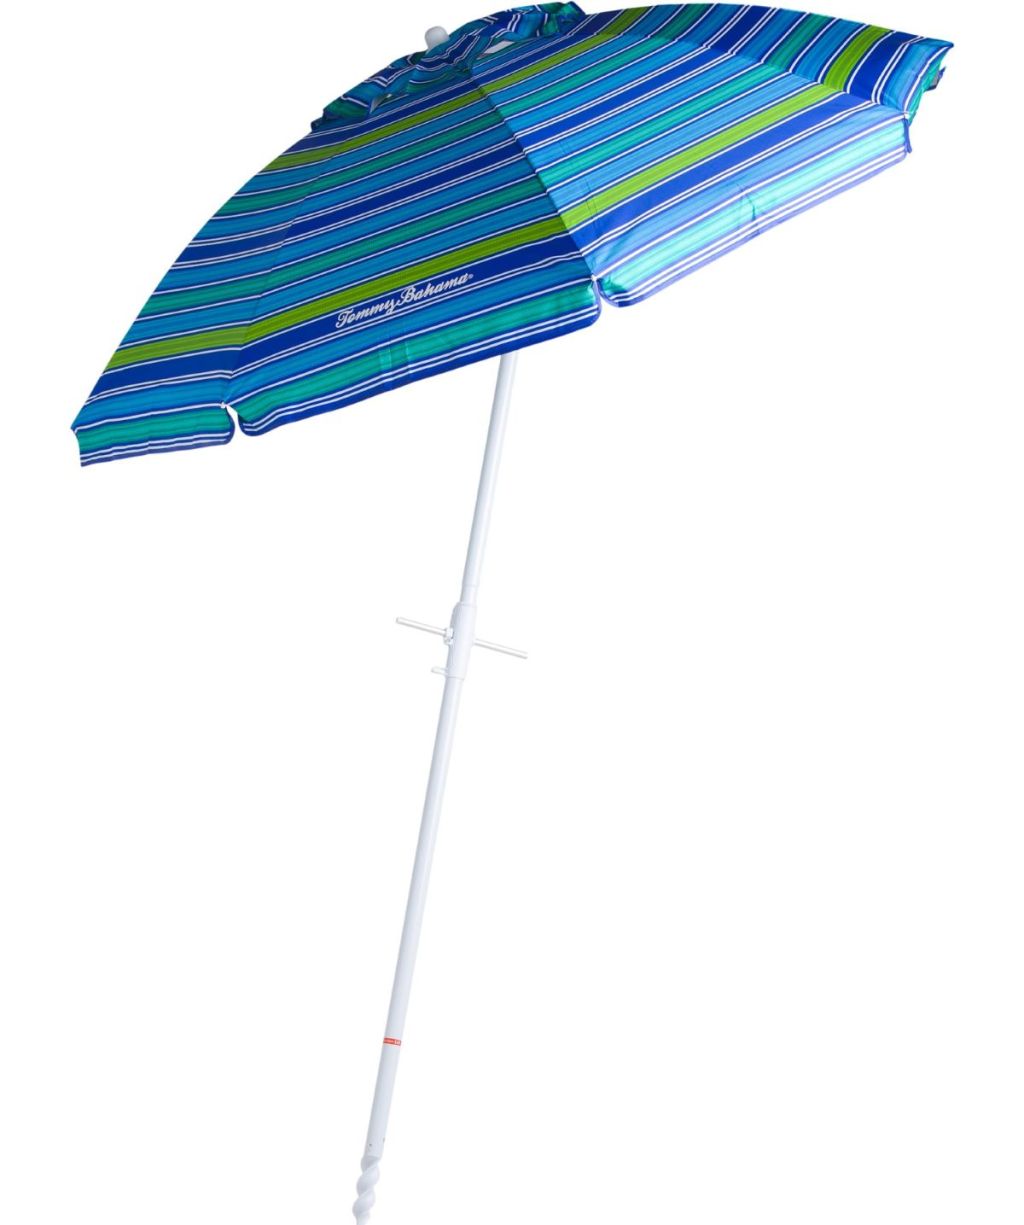 Blue and green beach umbrella with a white pole